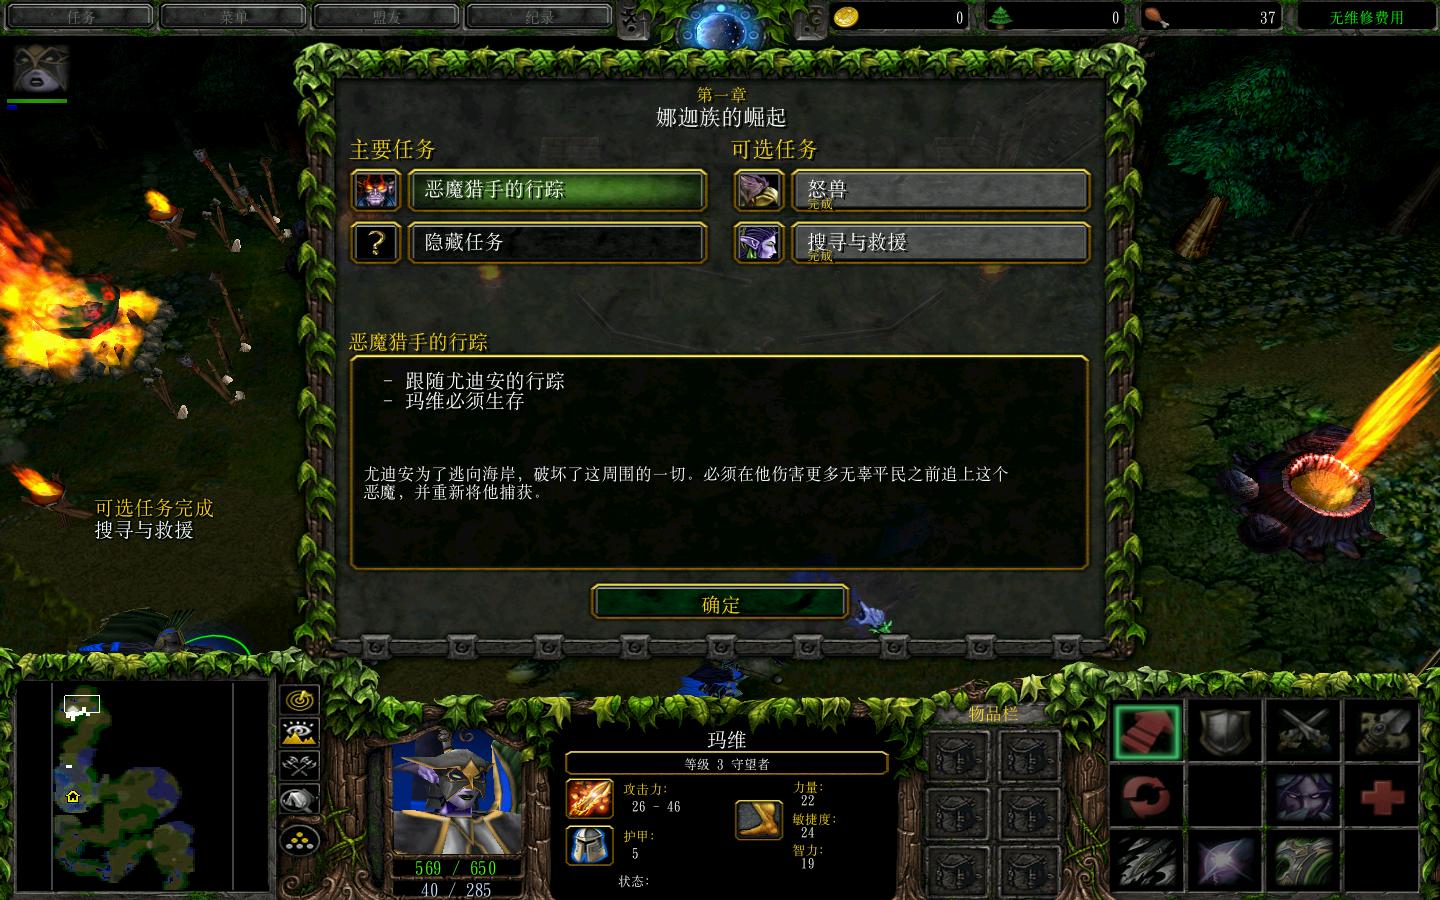 ħ3Warcraft III The Frozen Thronev1.24RPGv4.3.0